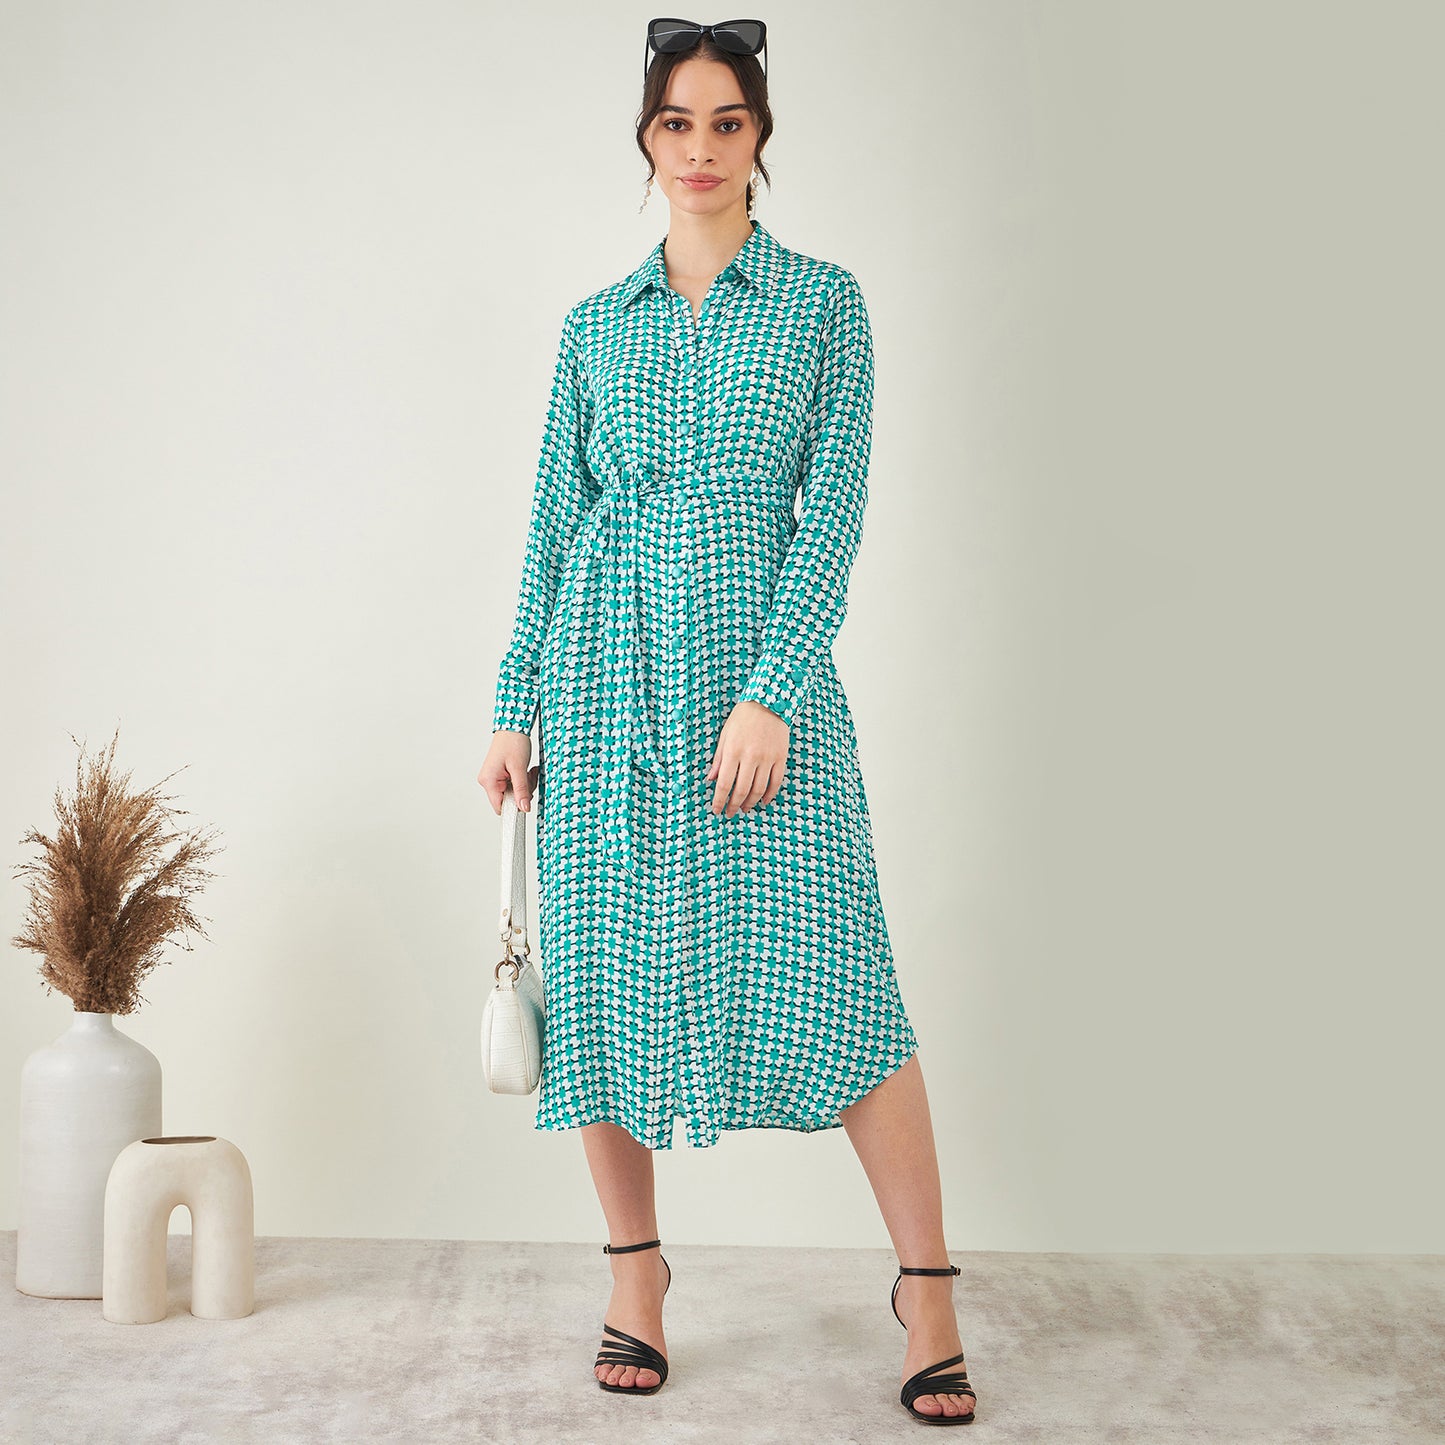 Turquoise and White Geometric Print Shirt Dress with Belt